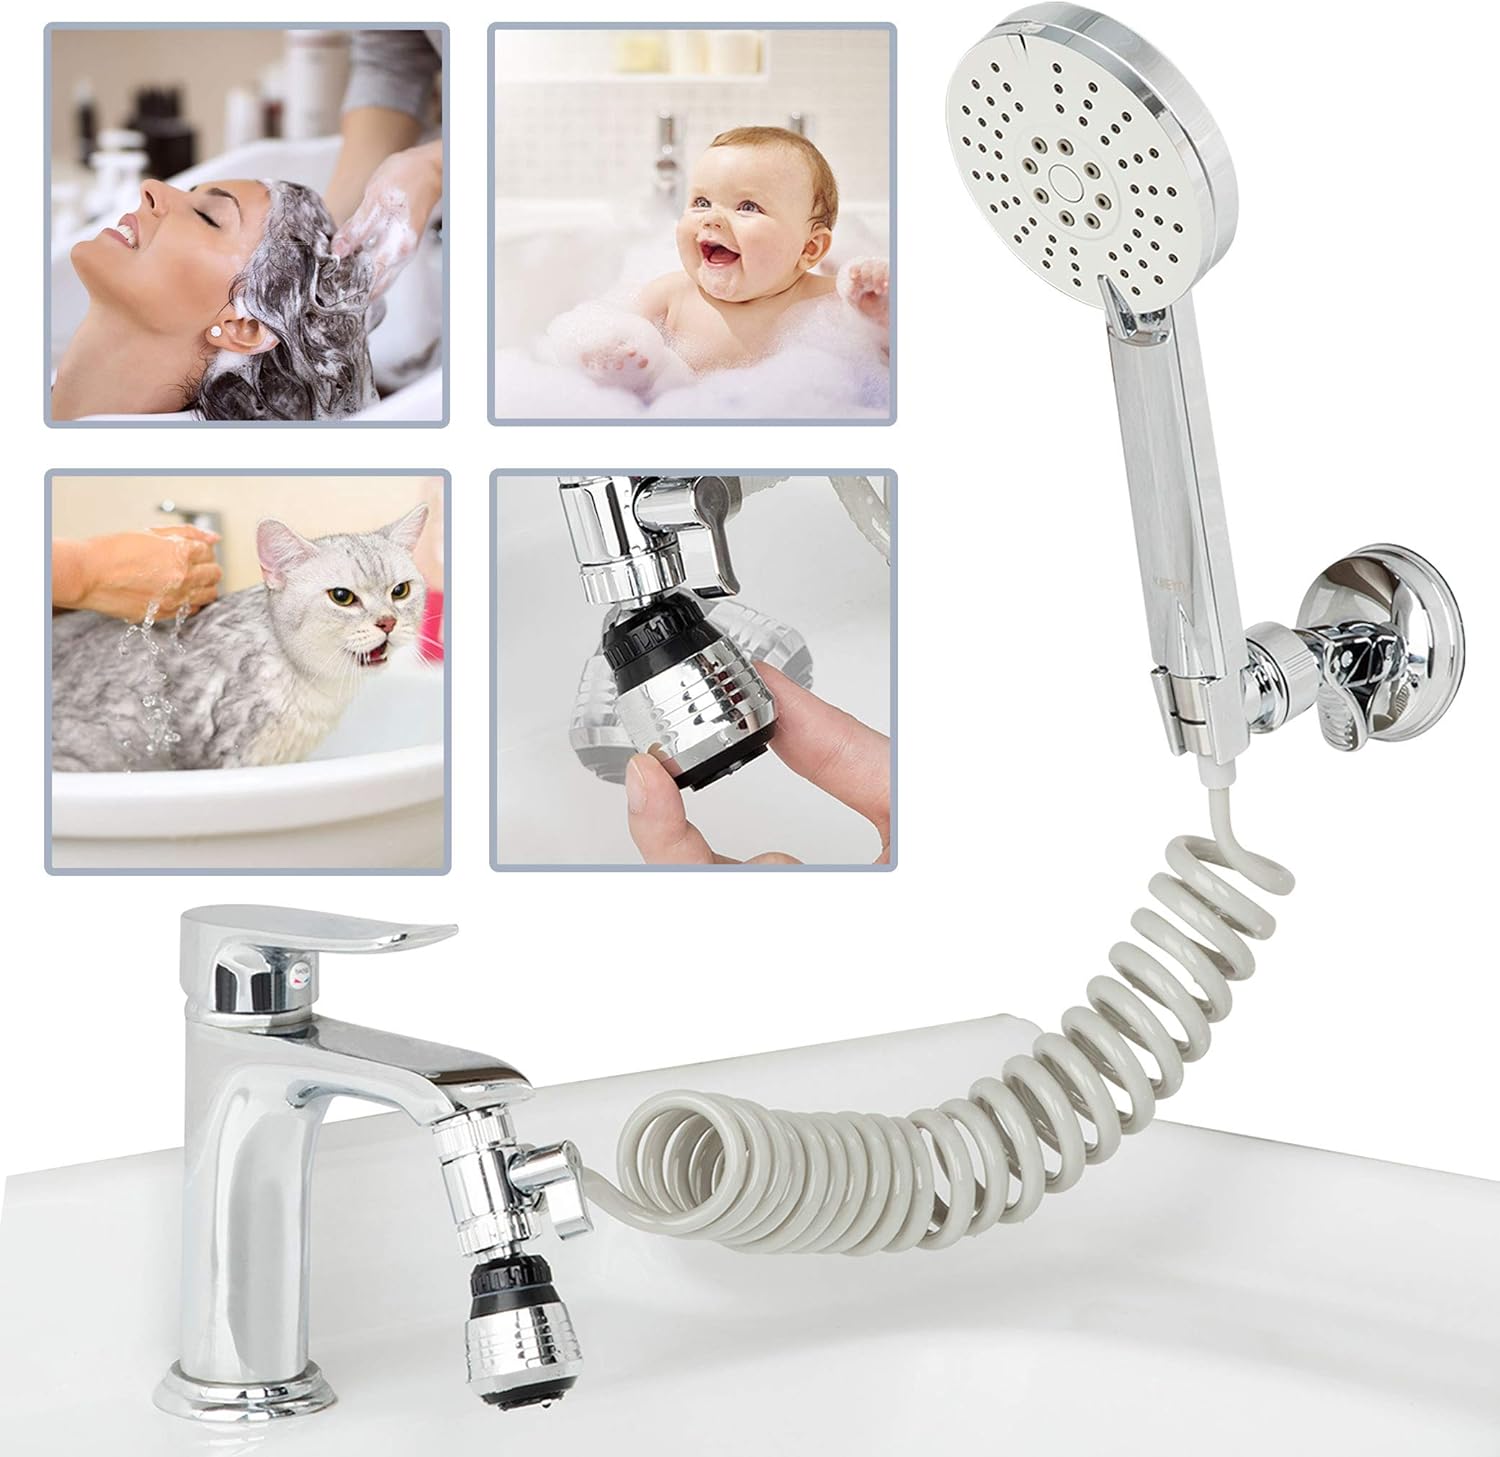 Klleyna Sink Sprayer Faucet Hose, Shower Heads That Connect To Bathtub Faucet